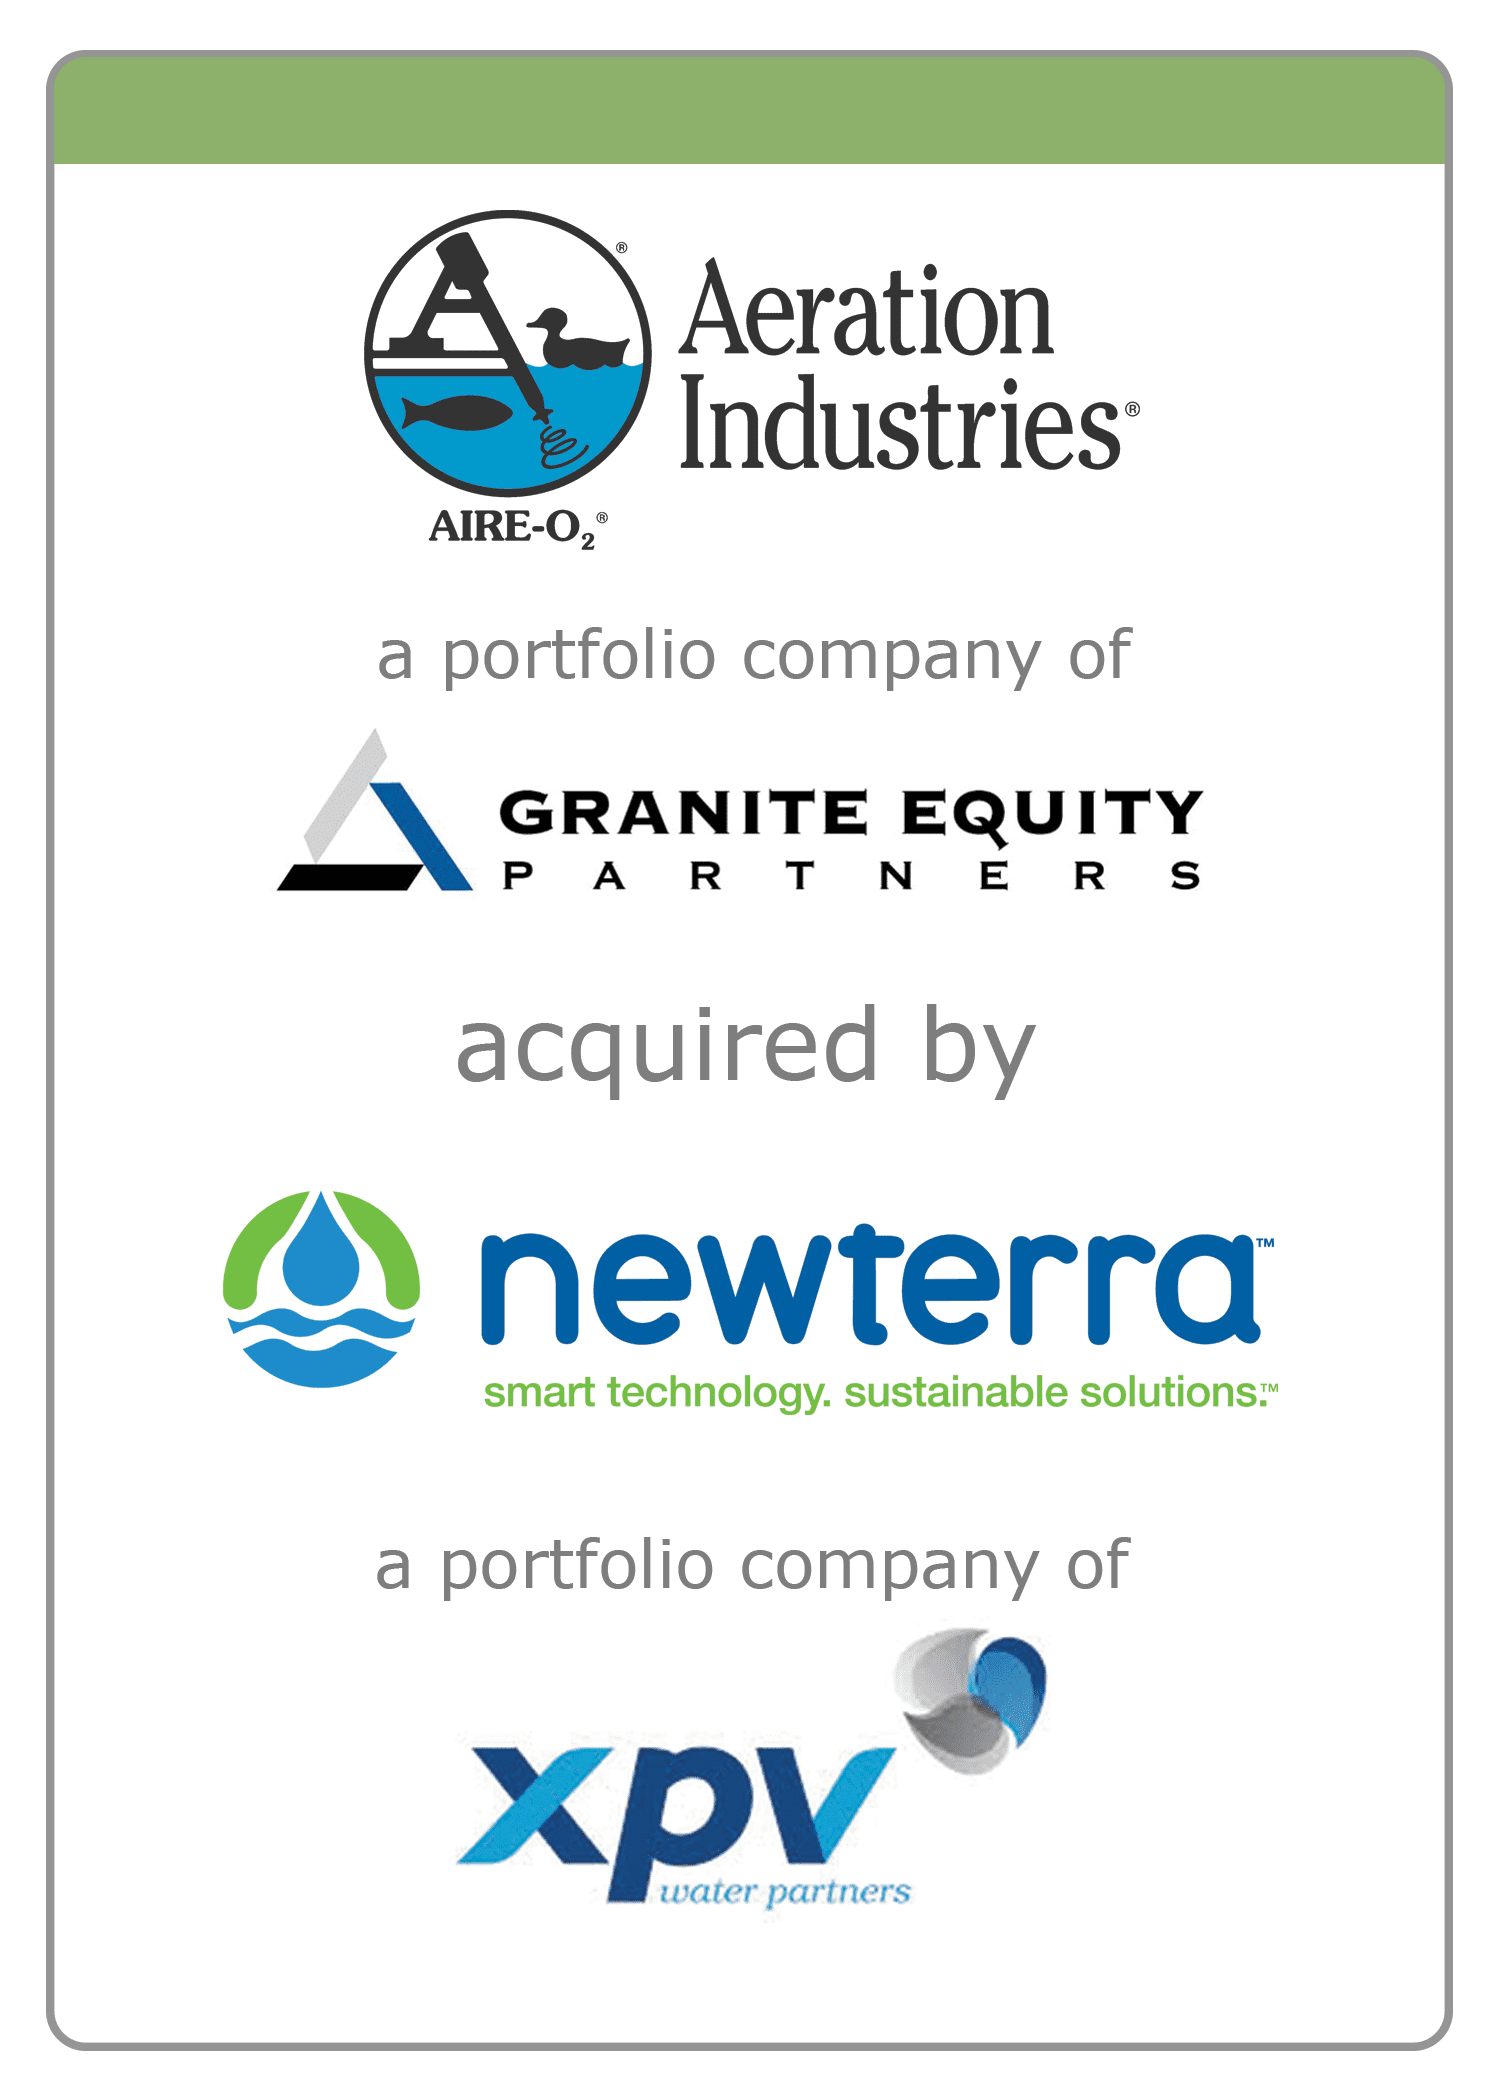 Aeration Industries acquired by o Newterra